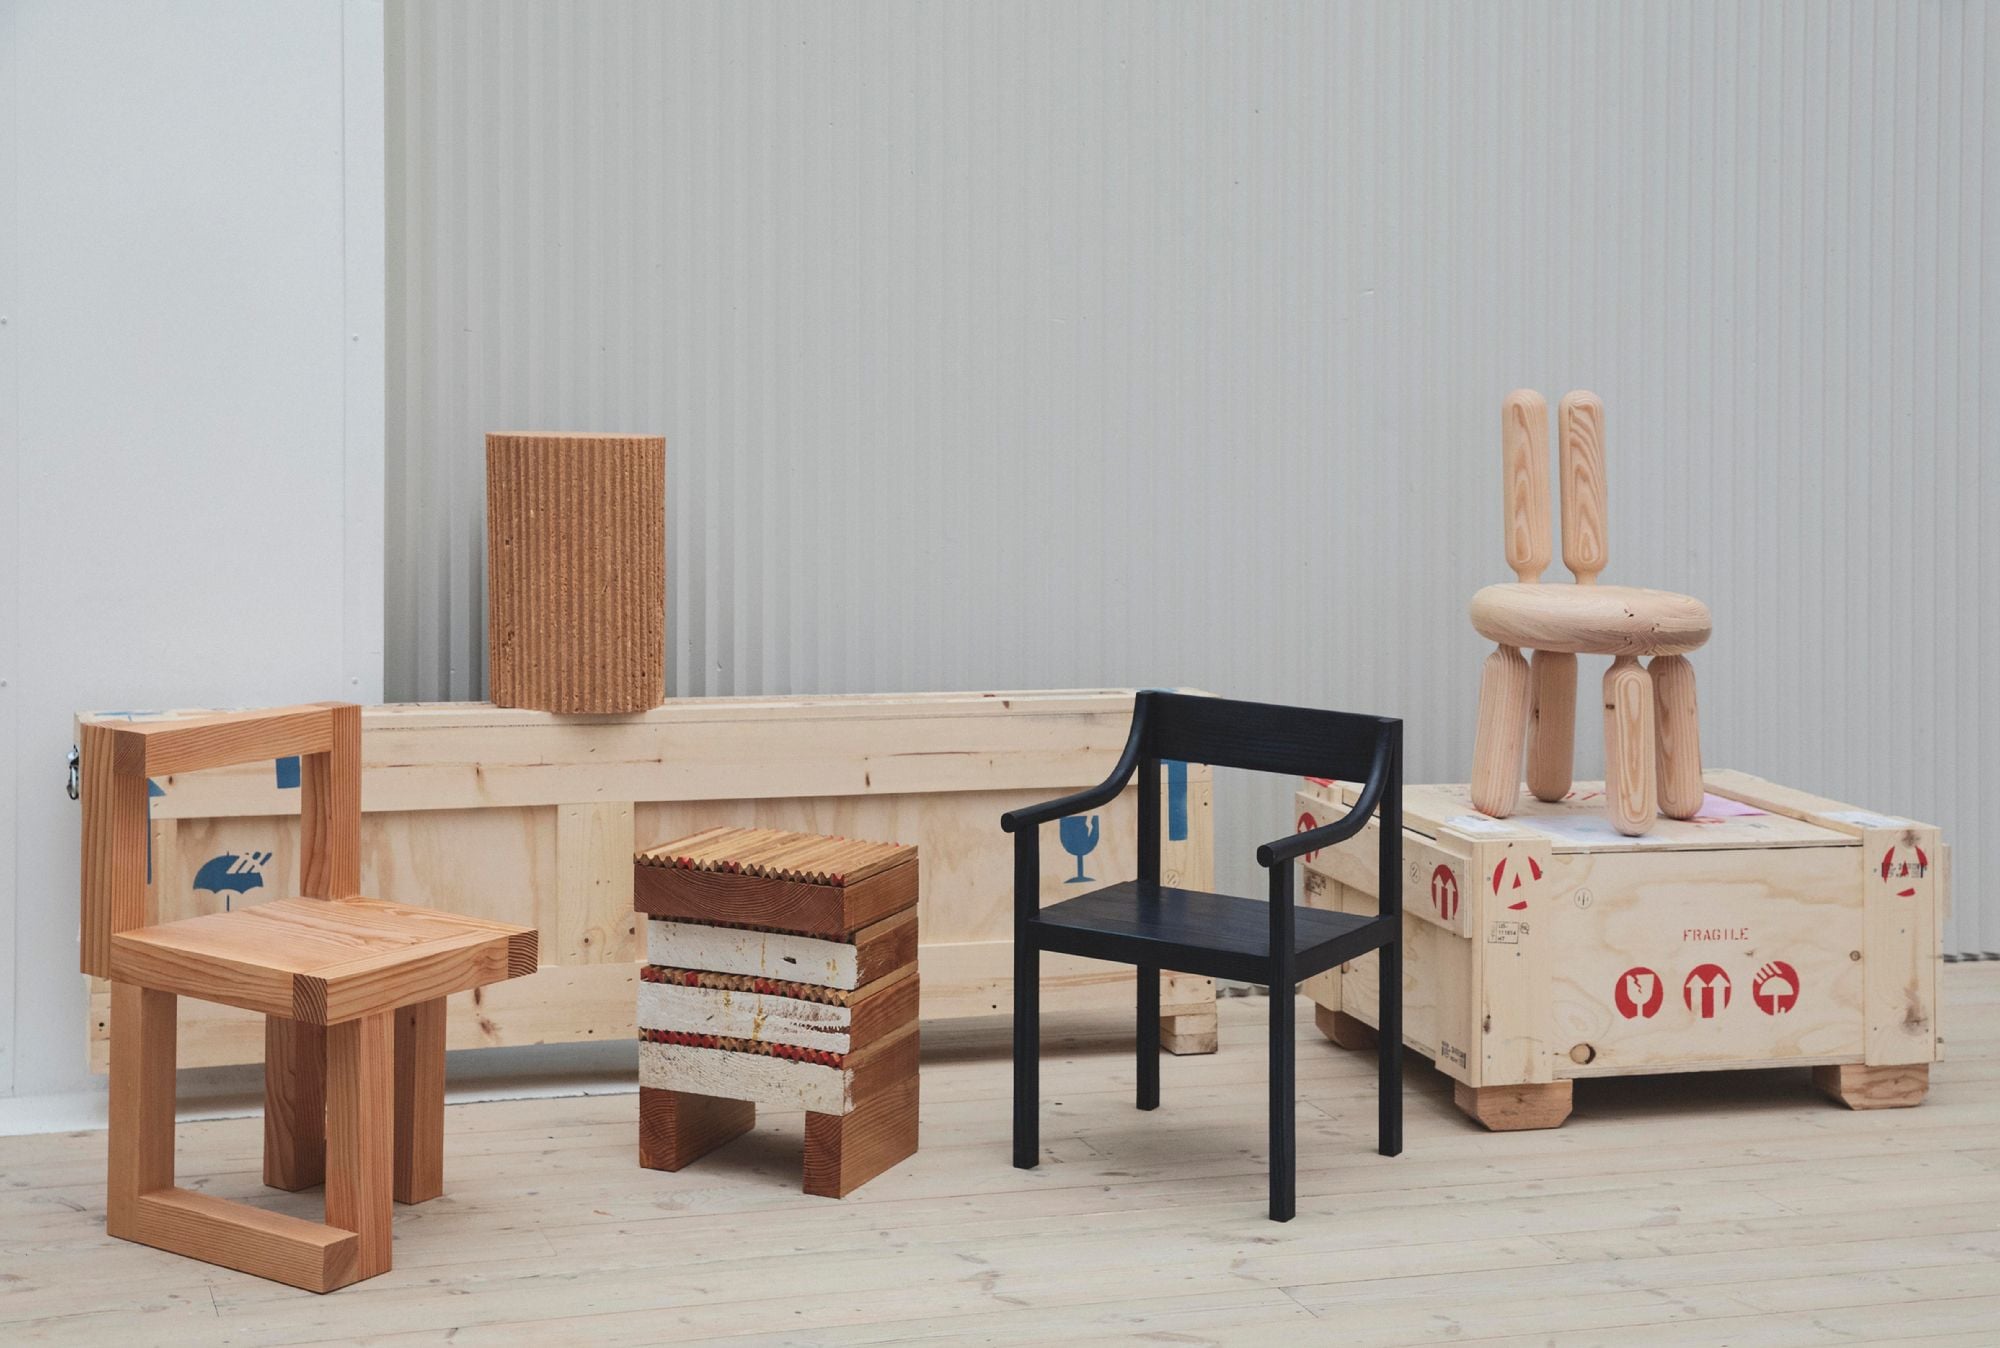 A few of the custom-made chairs displayed at Copenhagen Contemporary's Connie-Connie Café. 